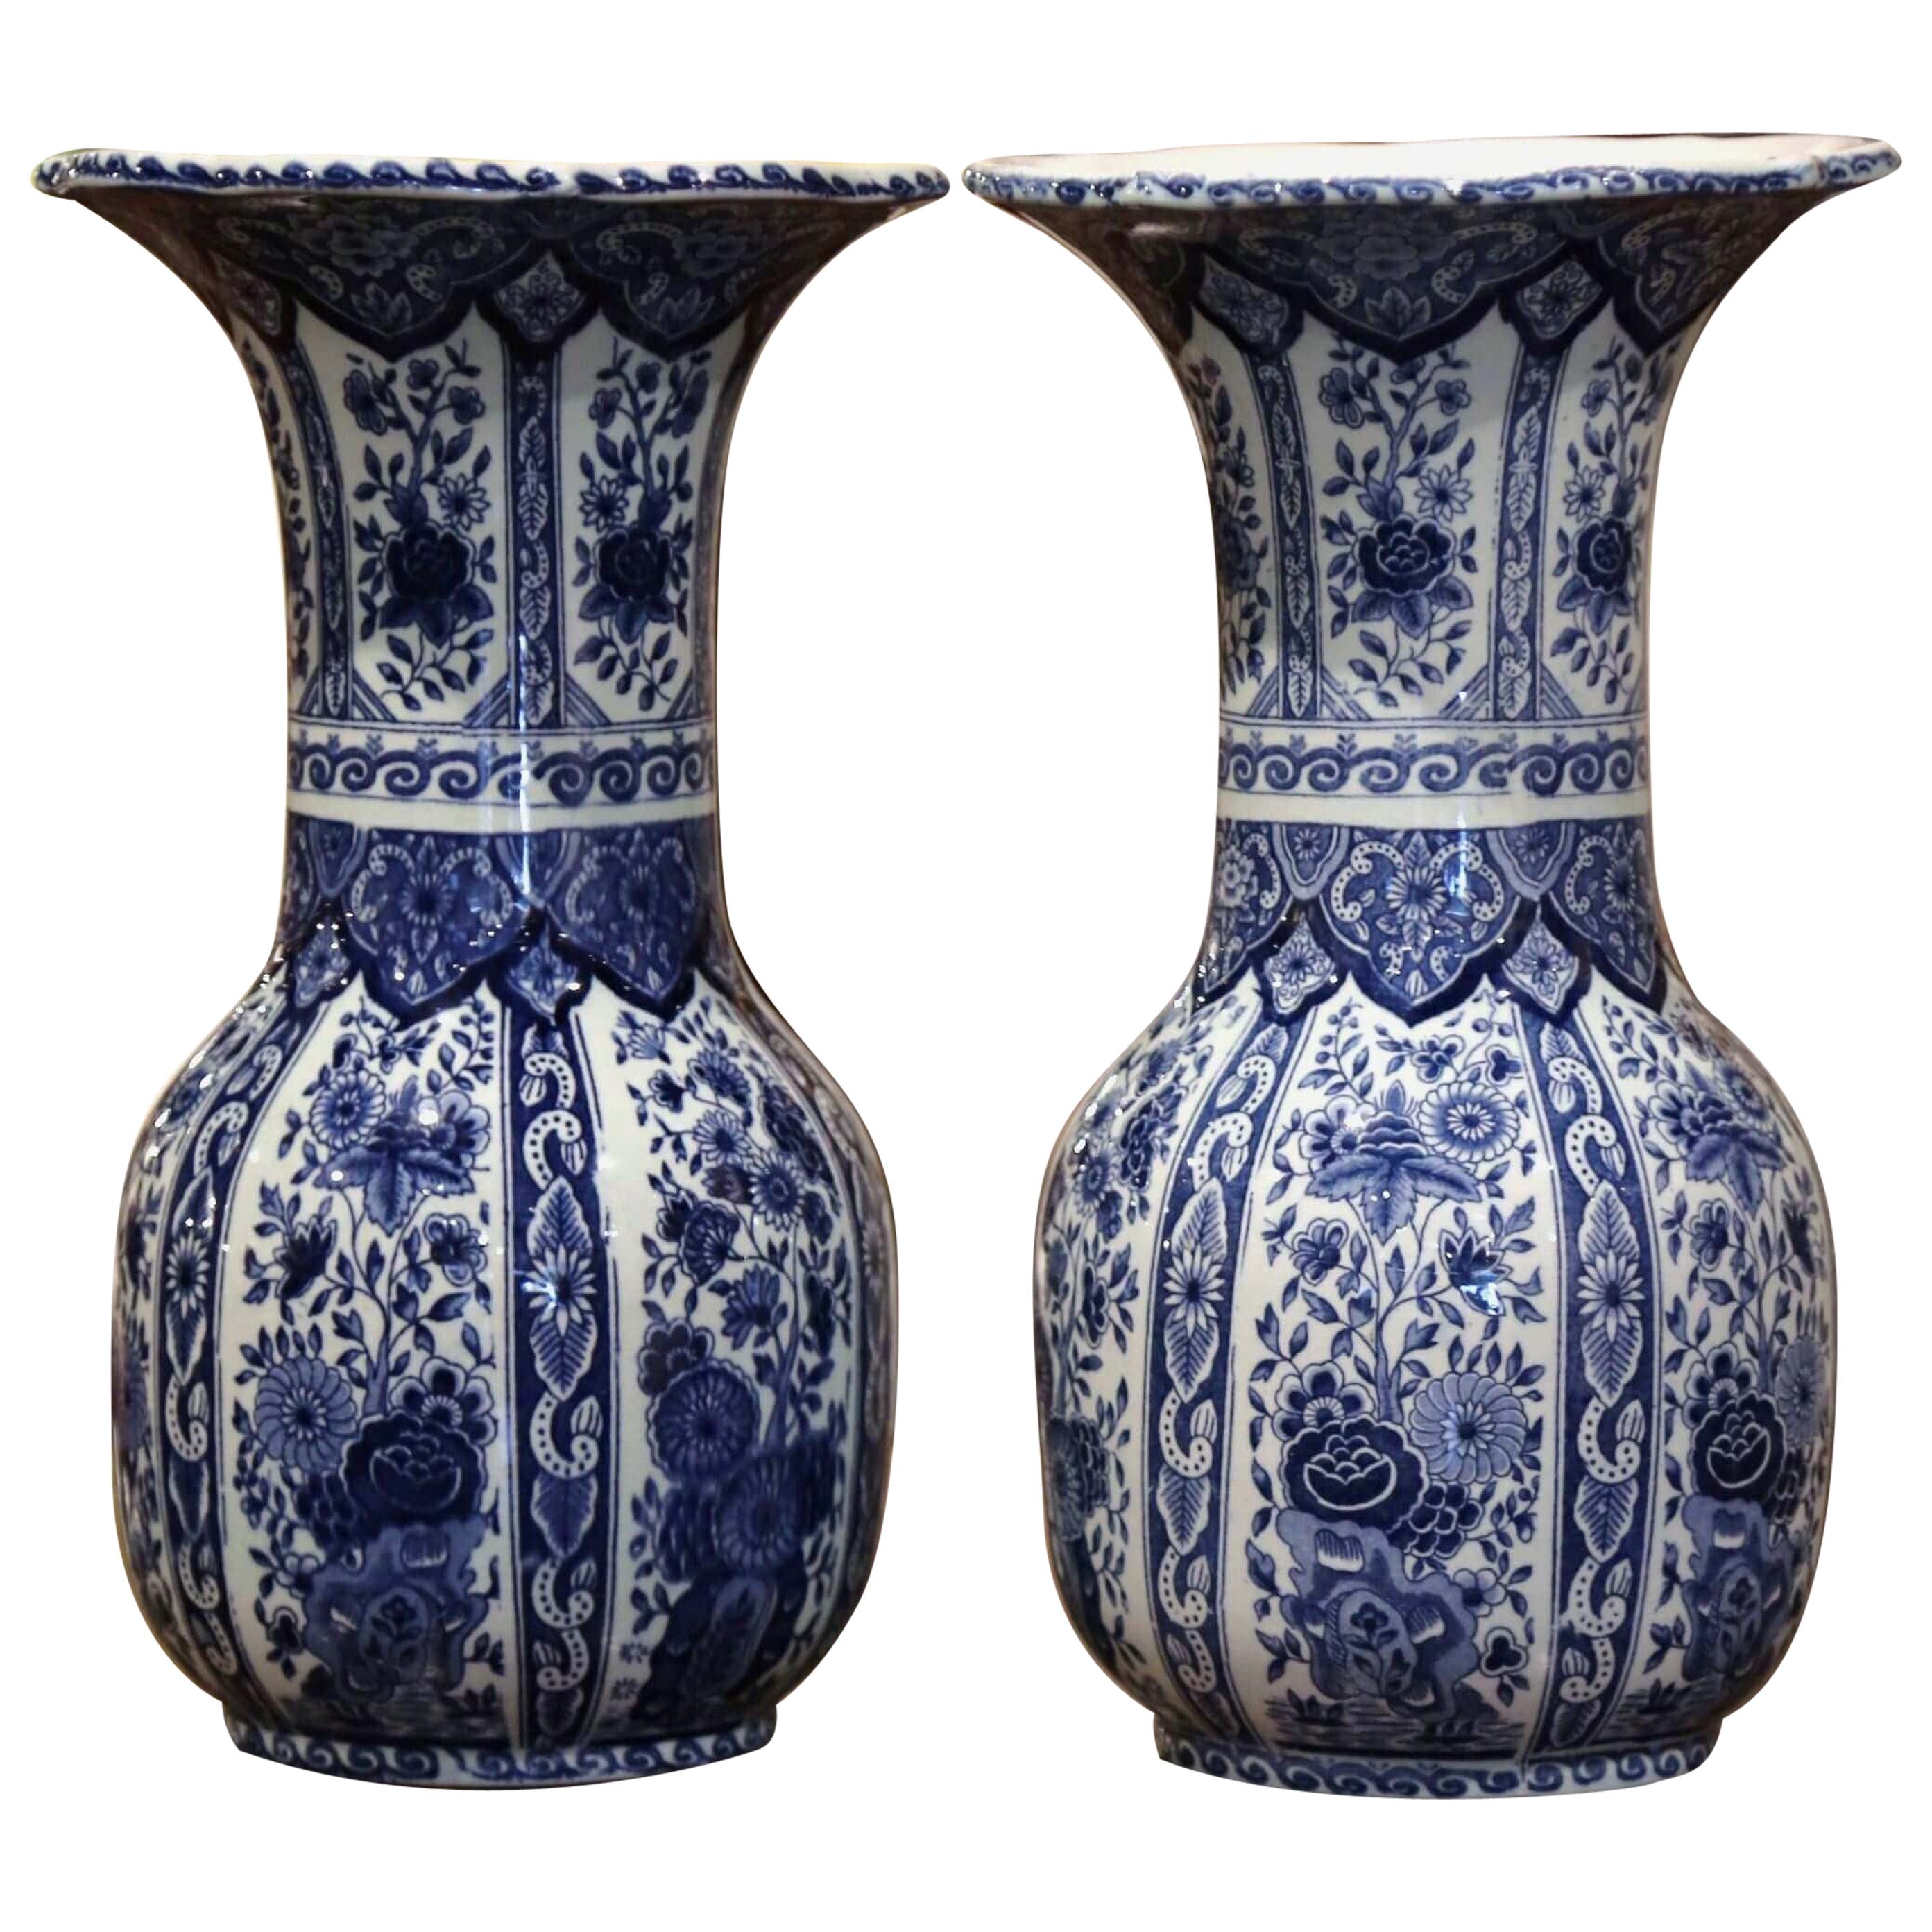 Pair of Mid-20th Century Dutch Royal Blue and White Painted Faience Delft Vases